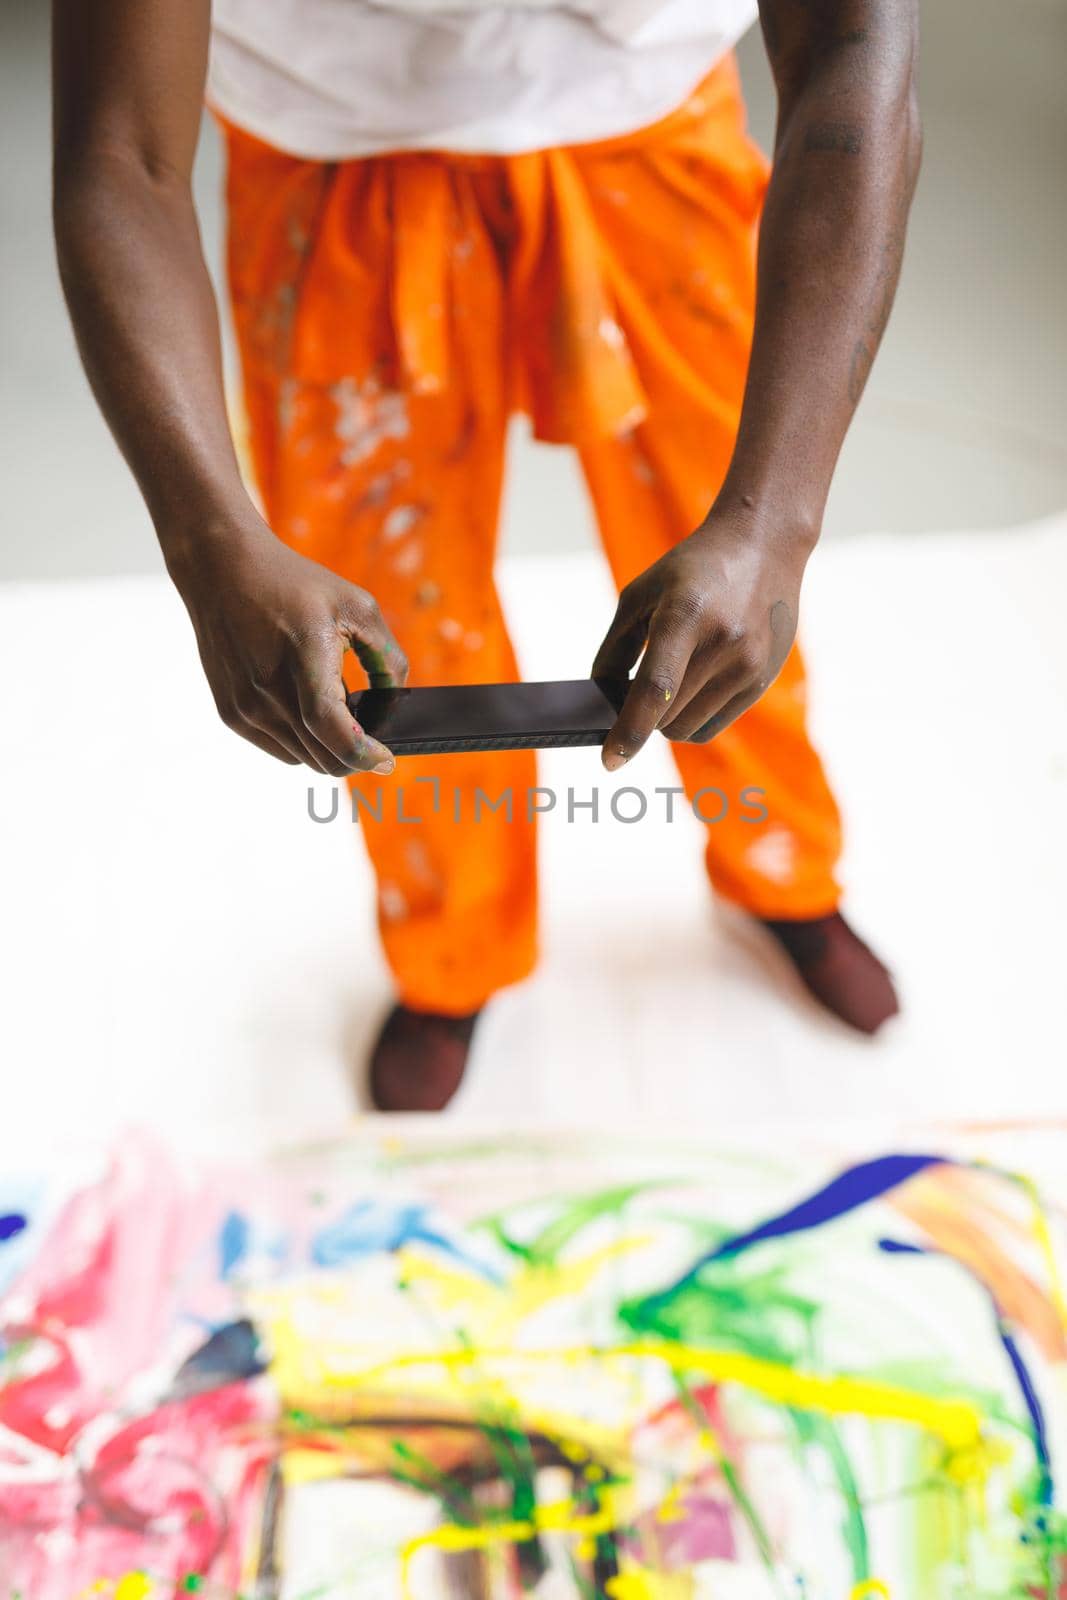 African american male painter at work taking picture of artwork with smartphone in art studio. creation and inspiration at an artists painting studio.